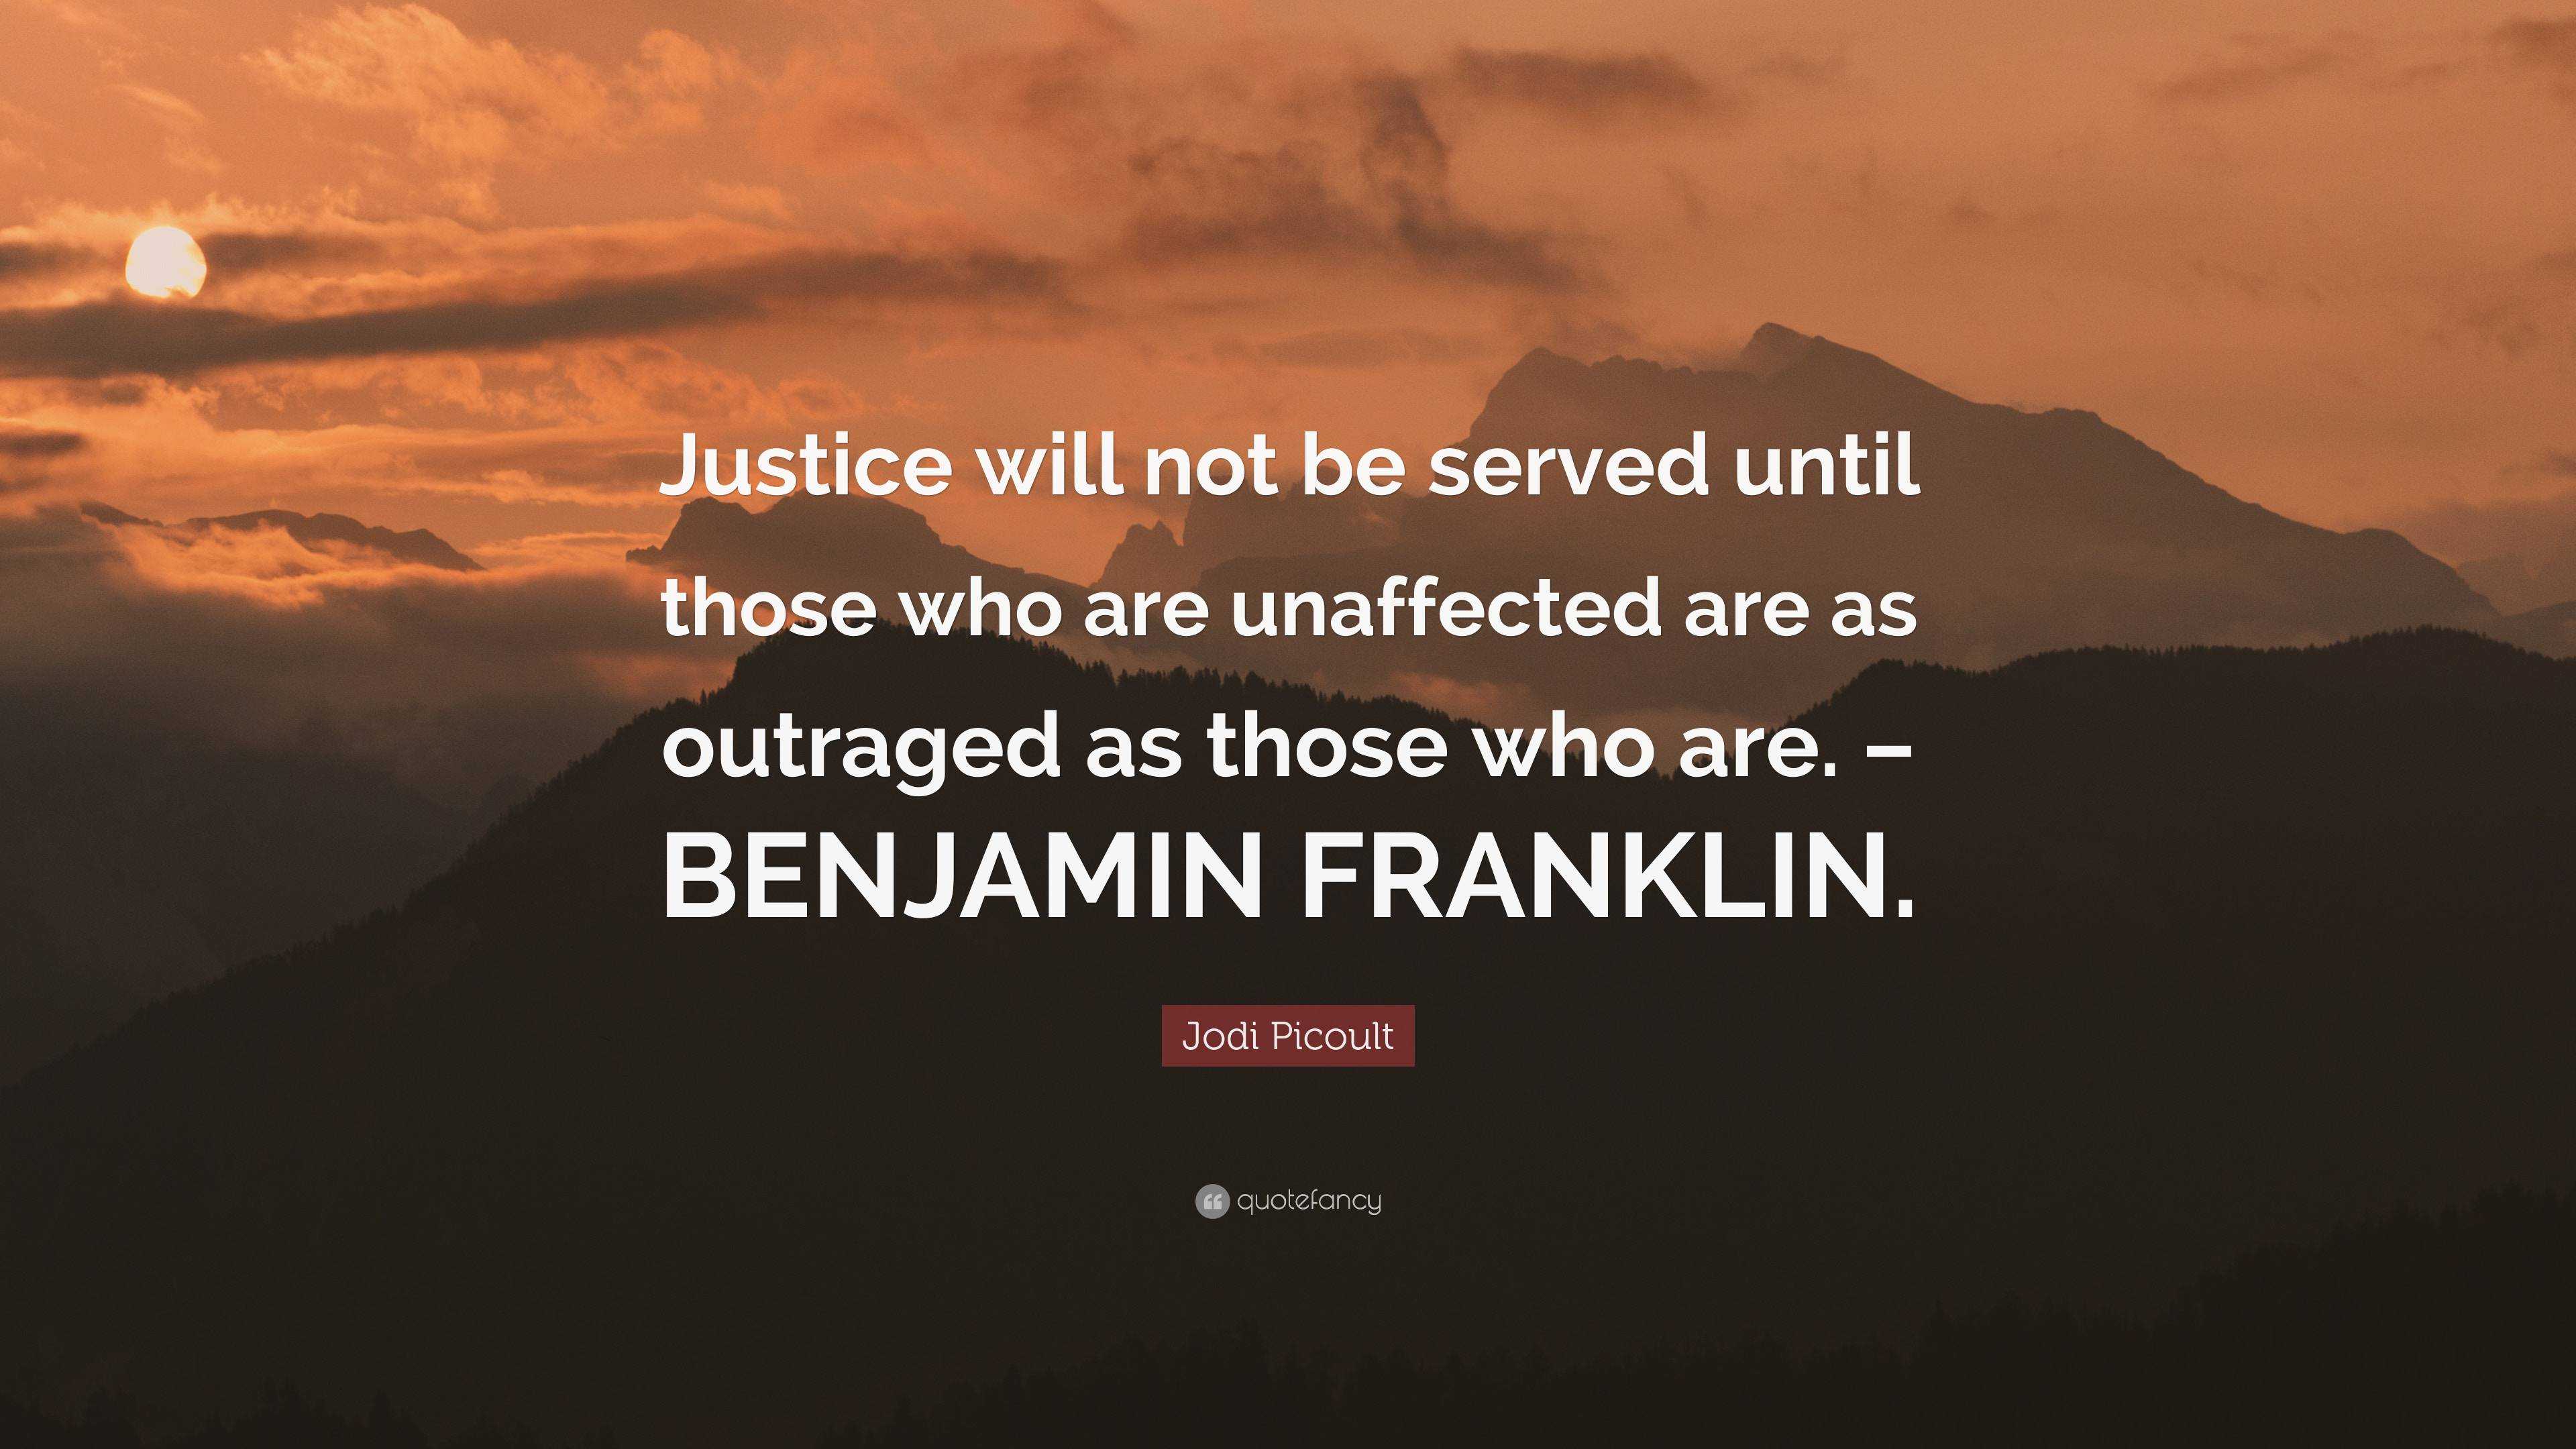 Jodi Picoult Quote “Justice will not be served until